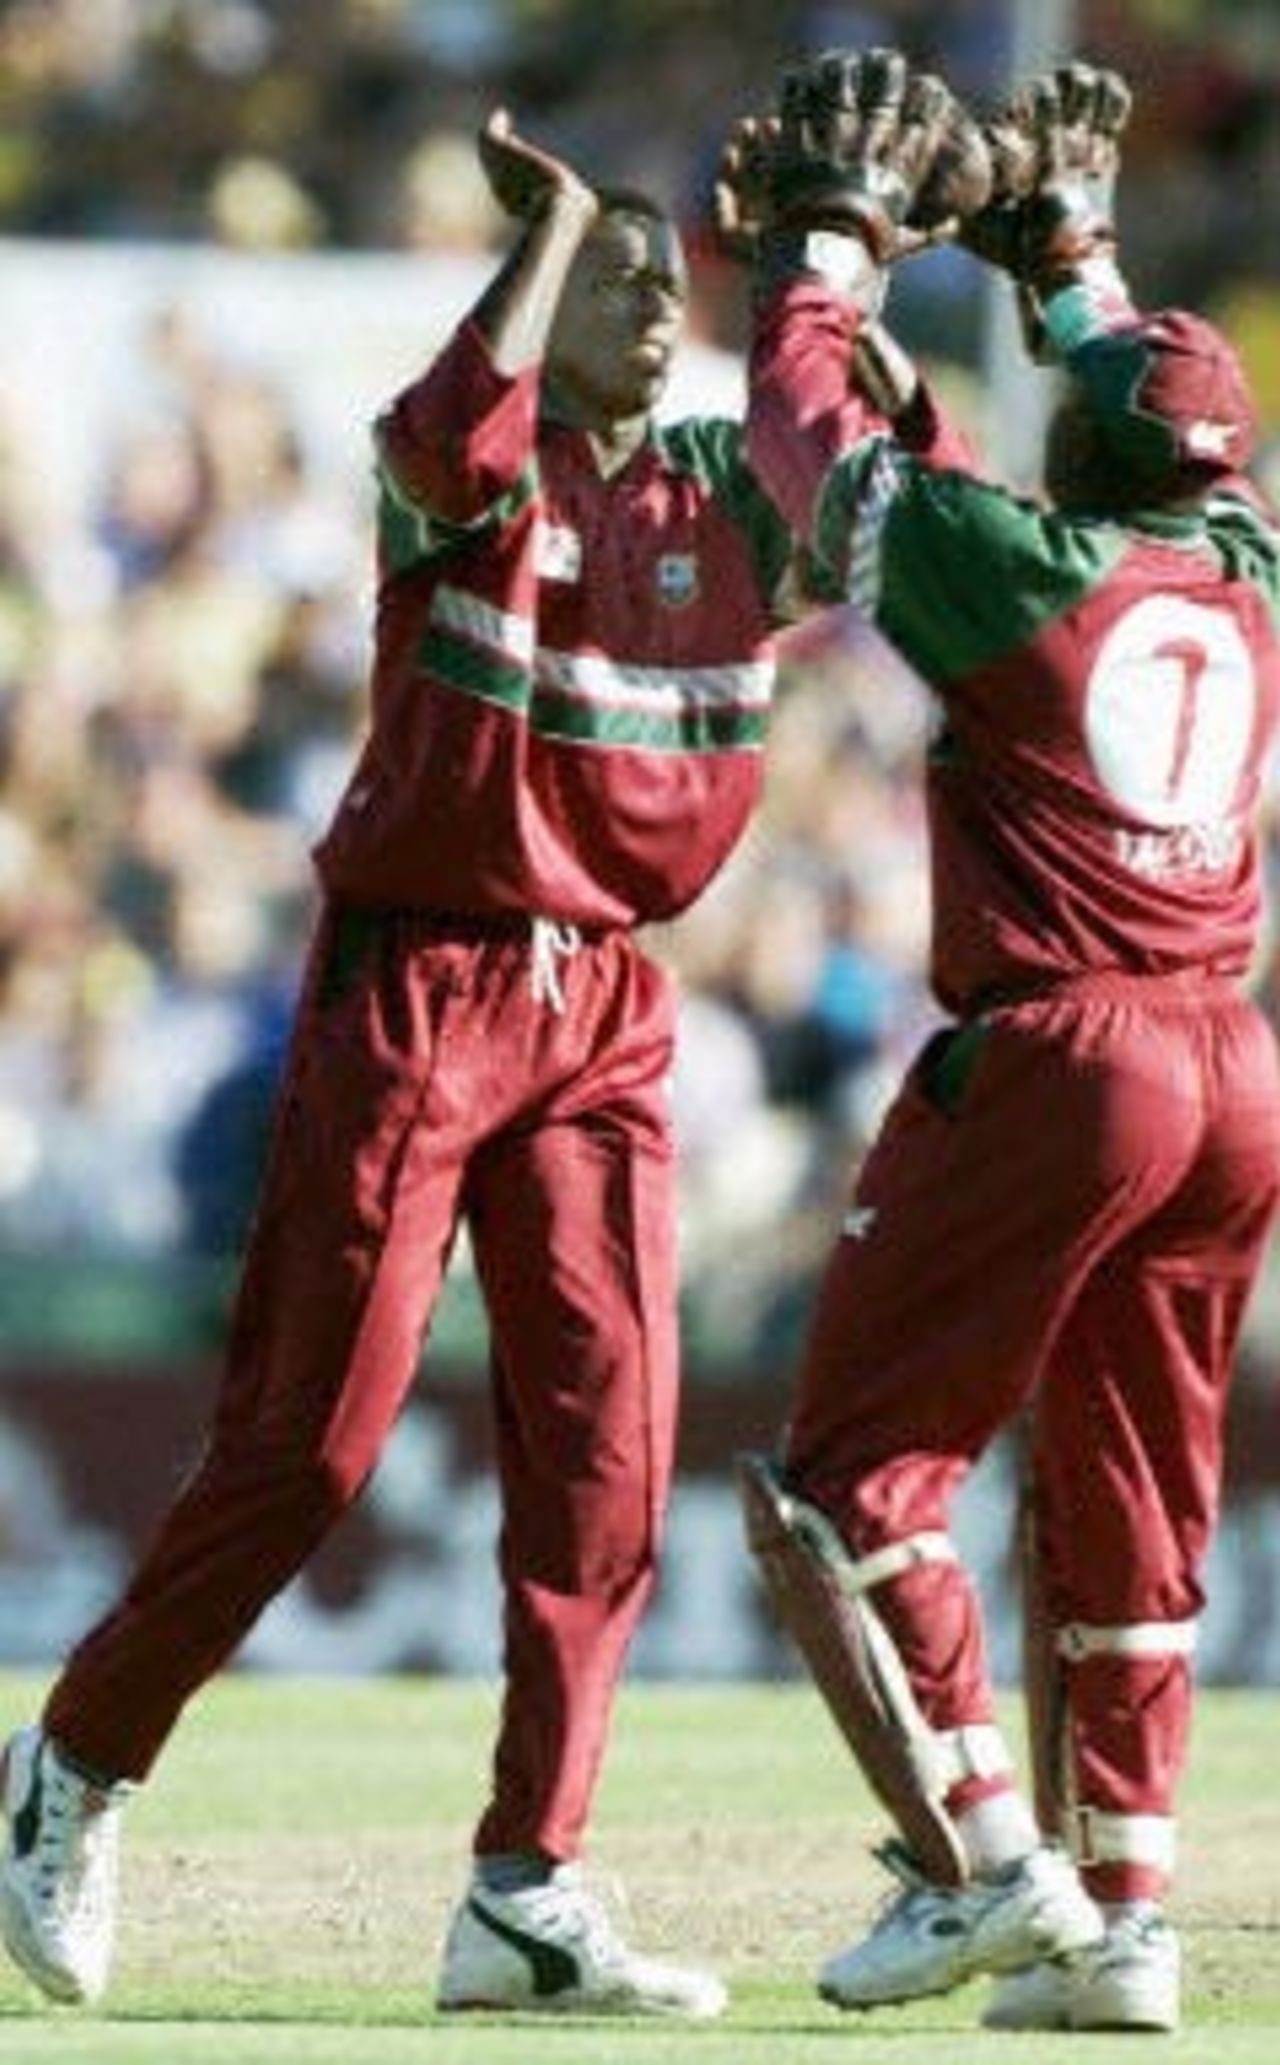 West Indies fast bowler Cameron Cuffy (L) celebrates taking the wicket of Australia's Shane Warne with West Indies wicket-keeper Ridley Jacobs (R) during the first cricket final between Australia and the West Indies in Sydney 07 February 2001. Warne was caught by Jacobs for 7 runs. Australia have set a target 254 for the West Indies to chase at the end of 50 overs.